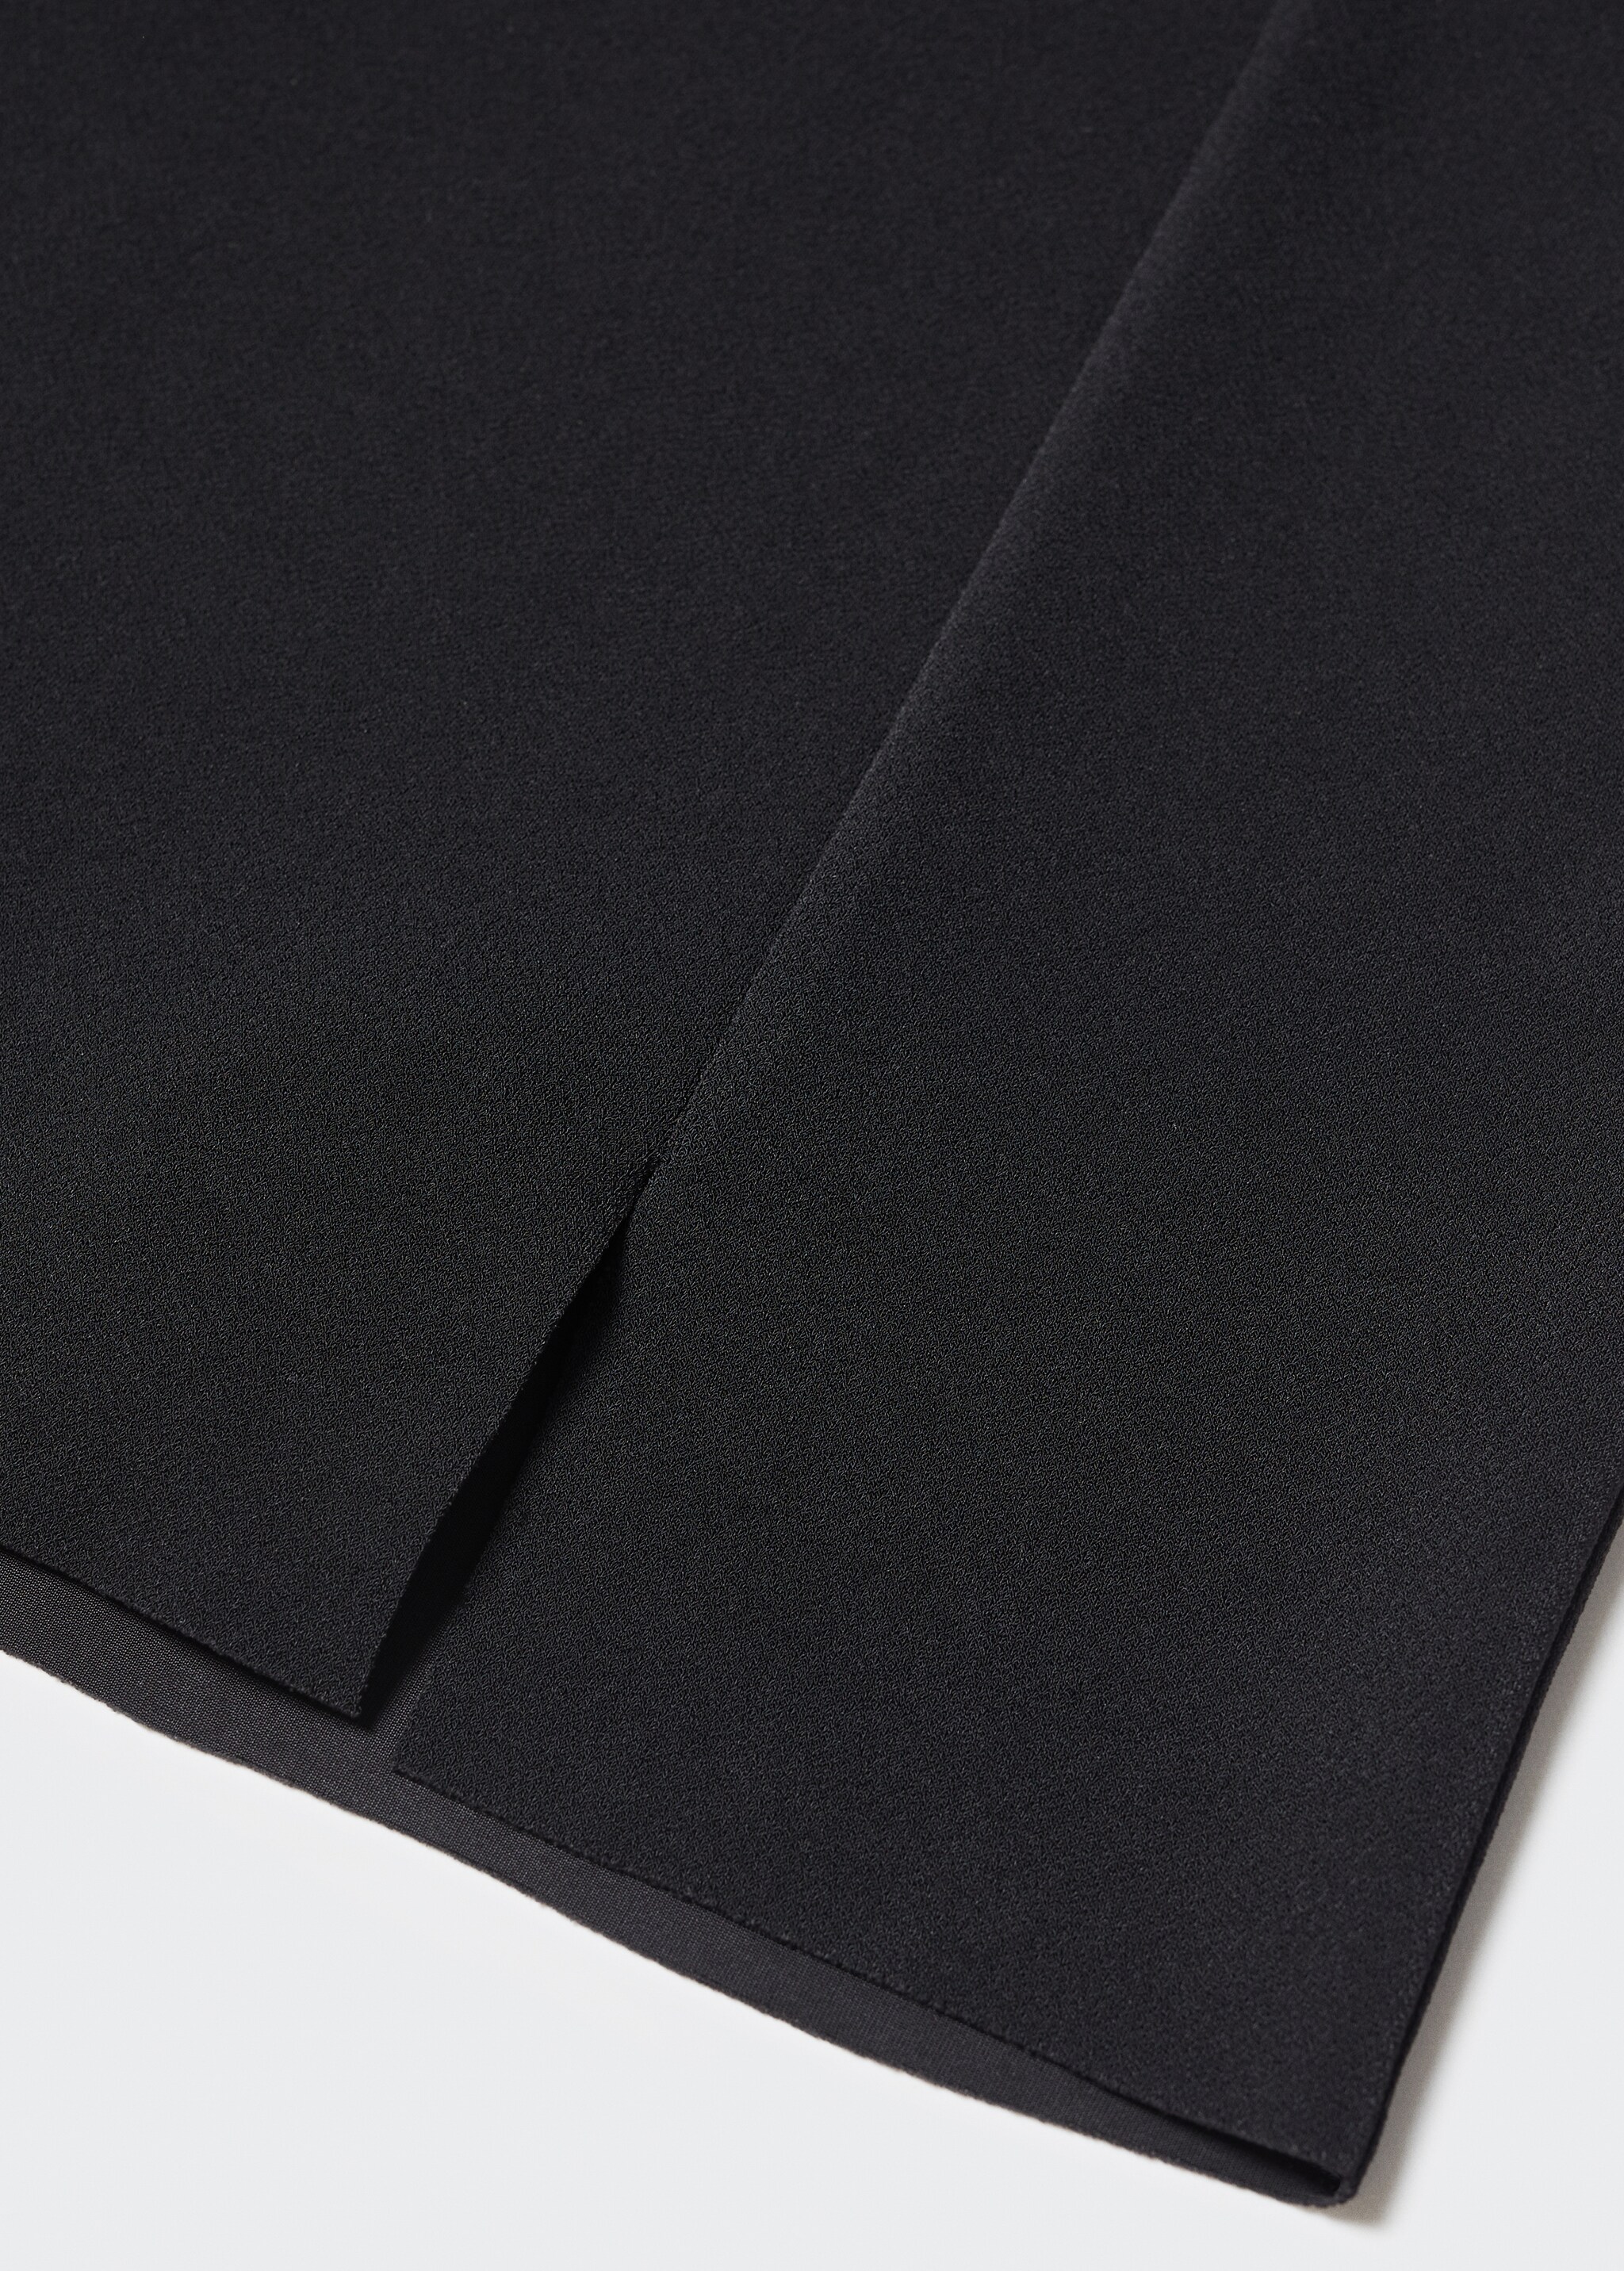 Vent midi skirt - Details of the article 8